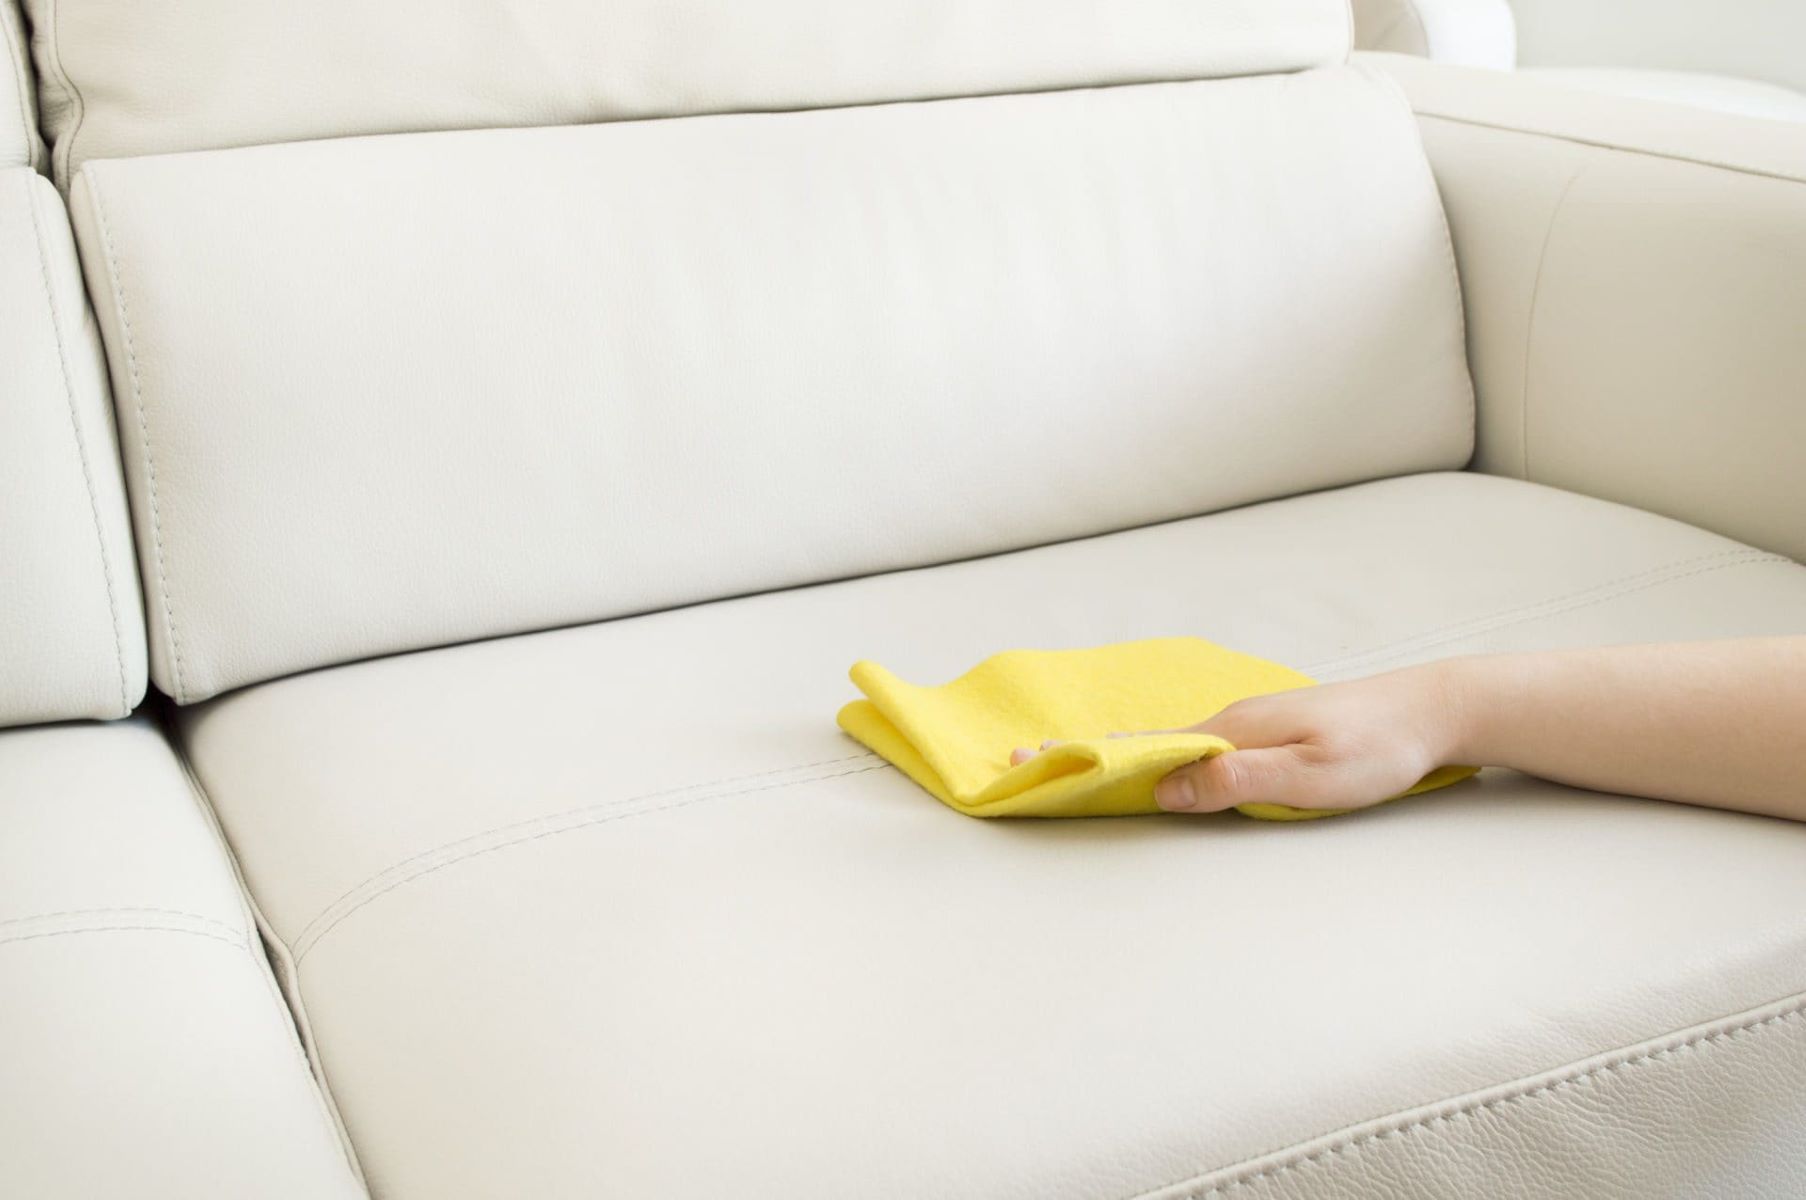 Eliminate Urine Odor From Sofa With These Easy Tips!